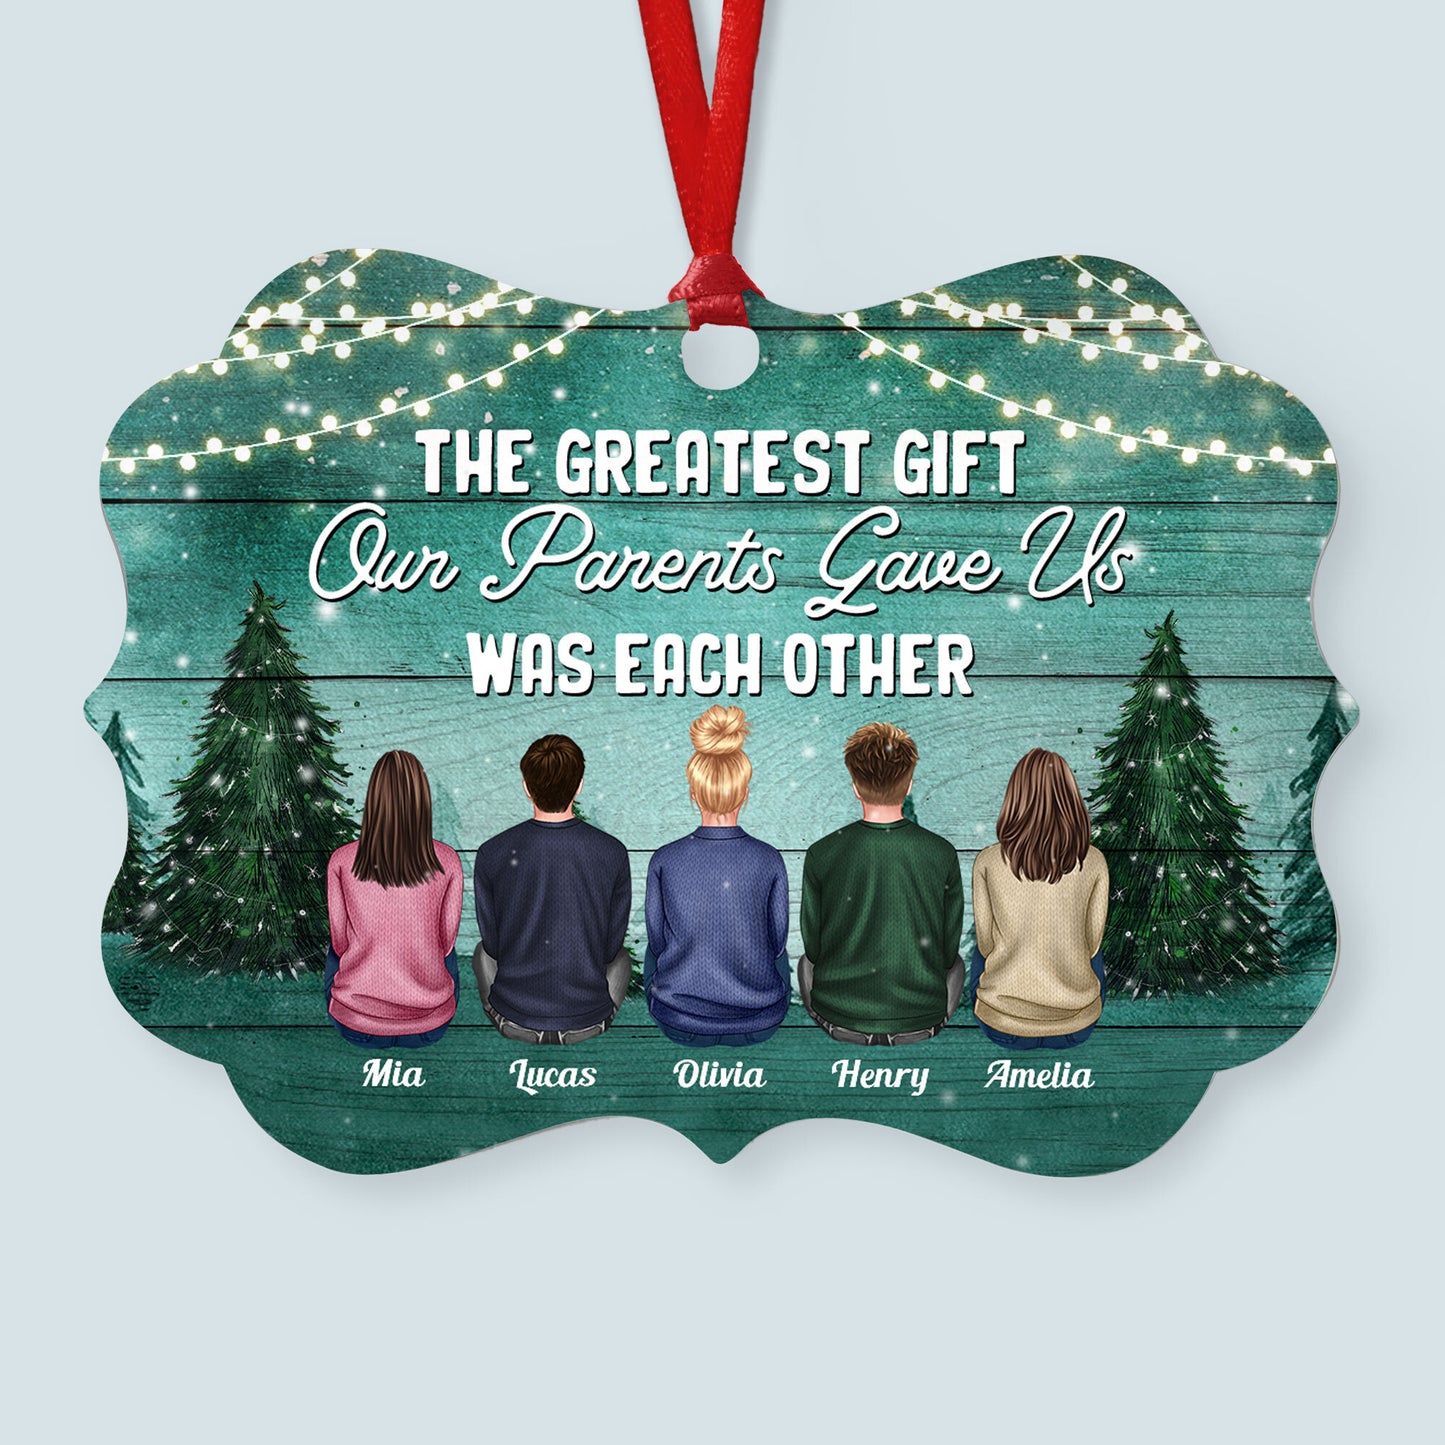 Brothers & Sisters A Whole Lot Of Love - Personalized Aluminum Ornament - Ugly Christmas Sweater Sitting